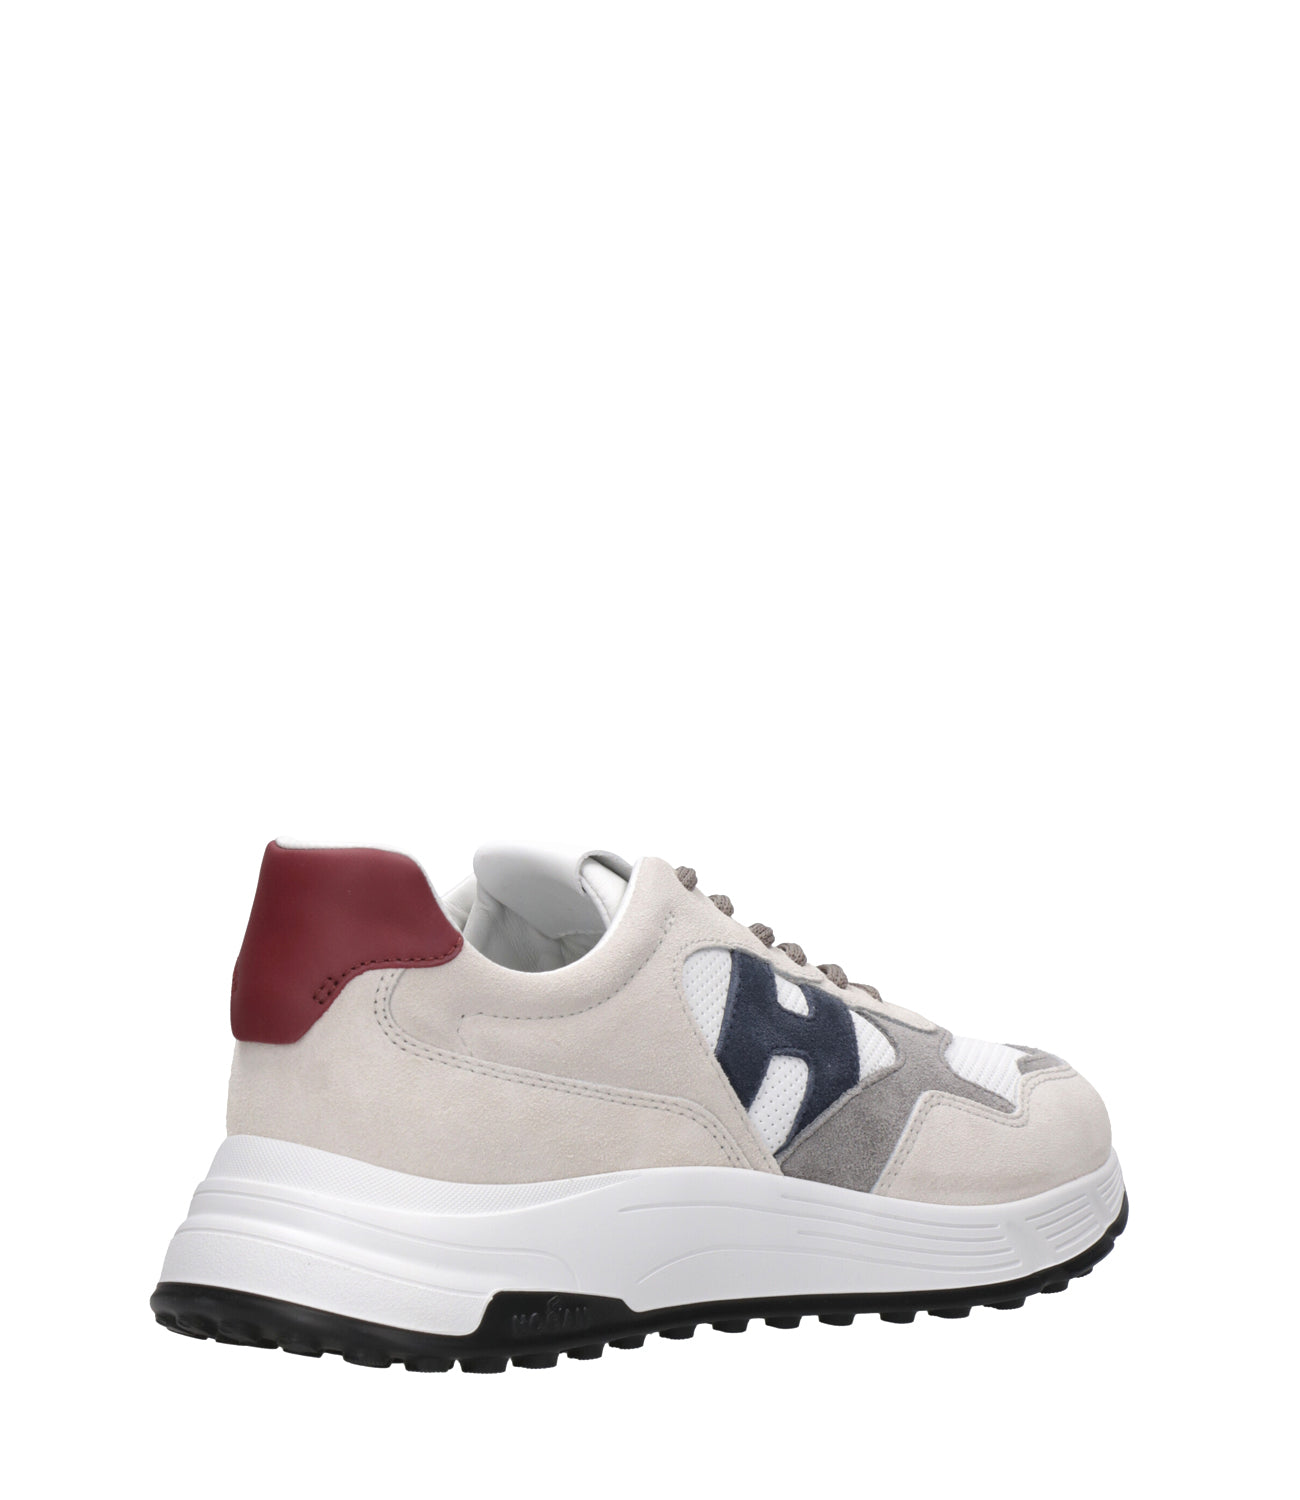 Hogan | Sneakers Hyperlight H Punched White, Grey and Bordeaux